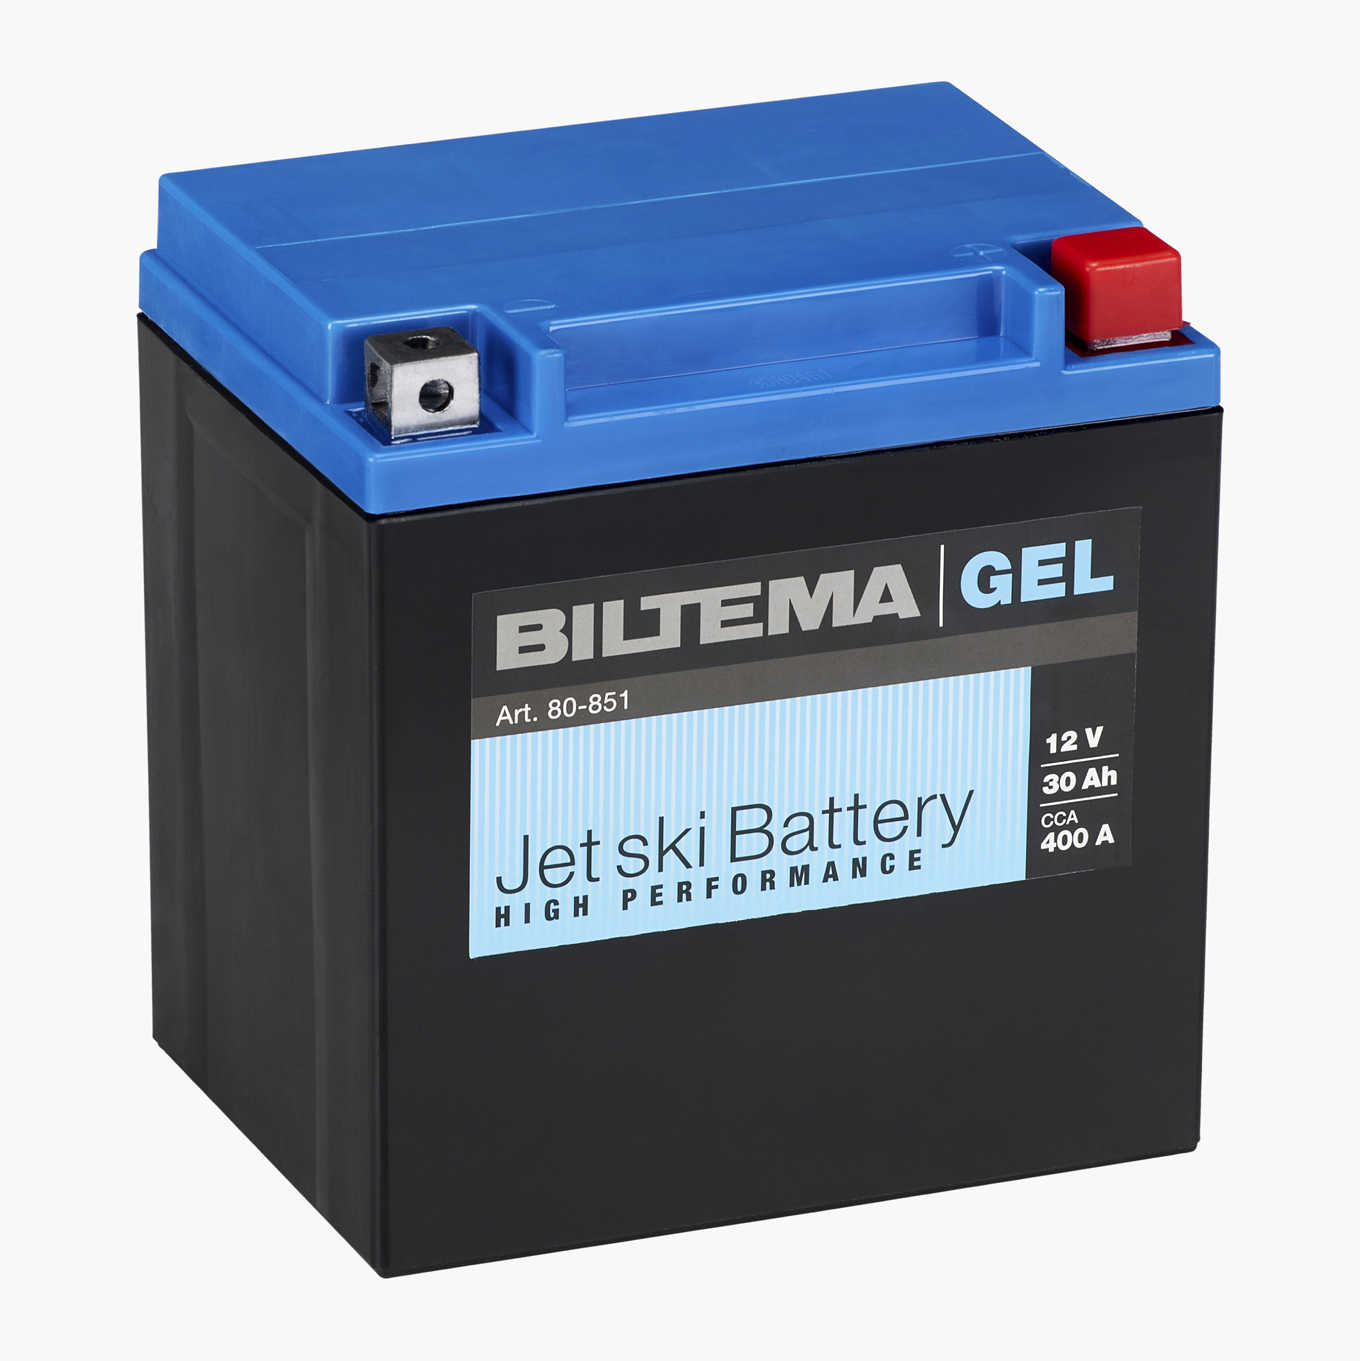 New larger battery